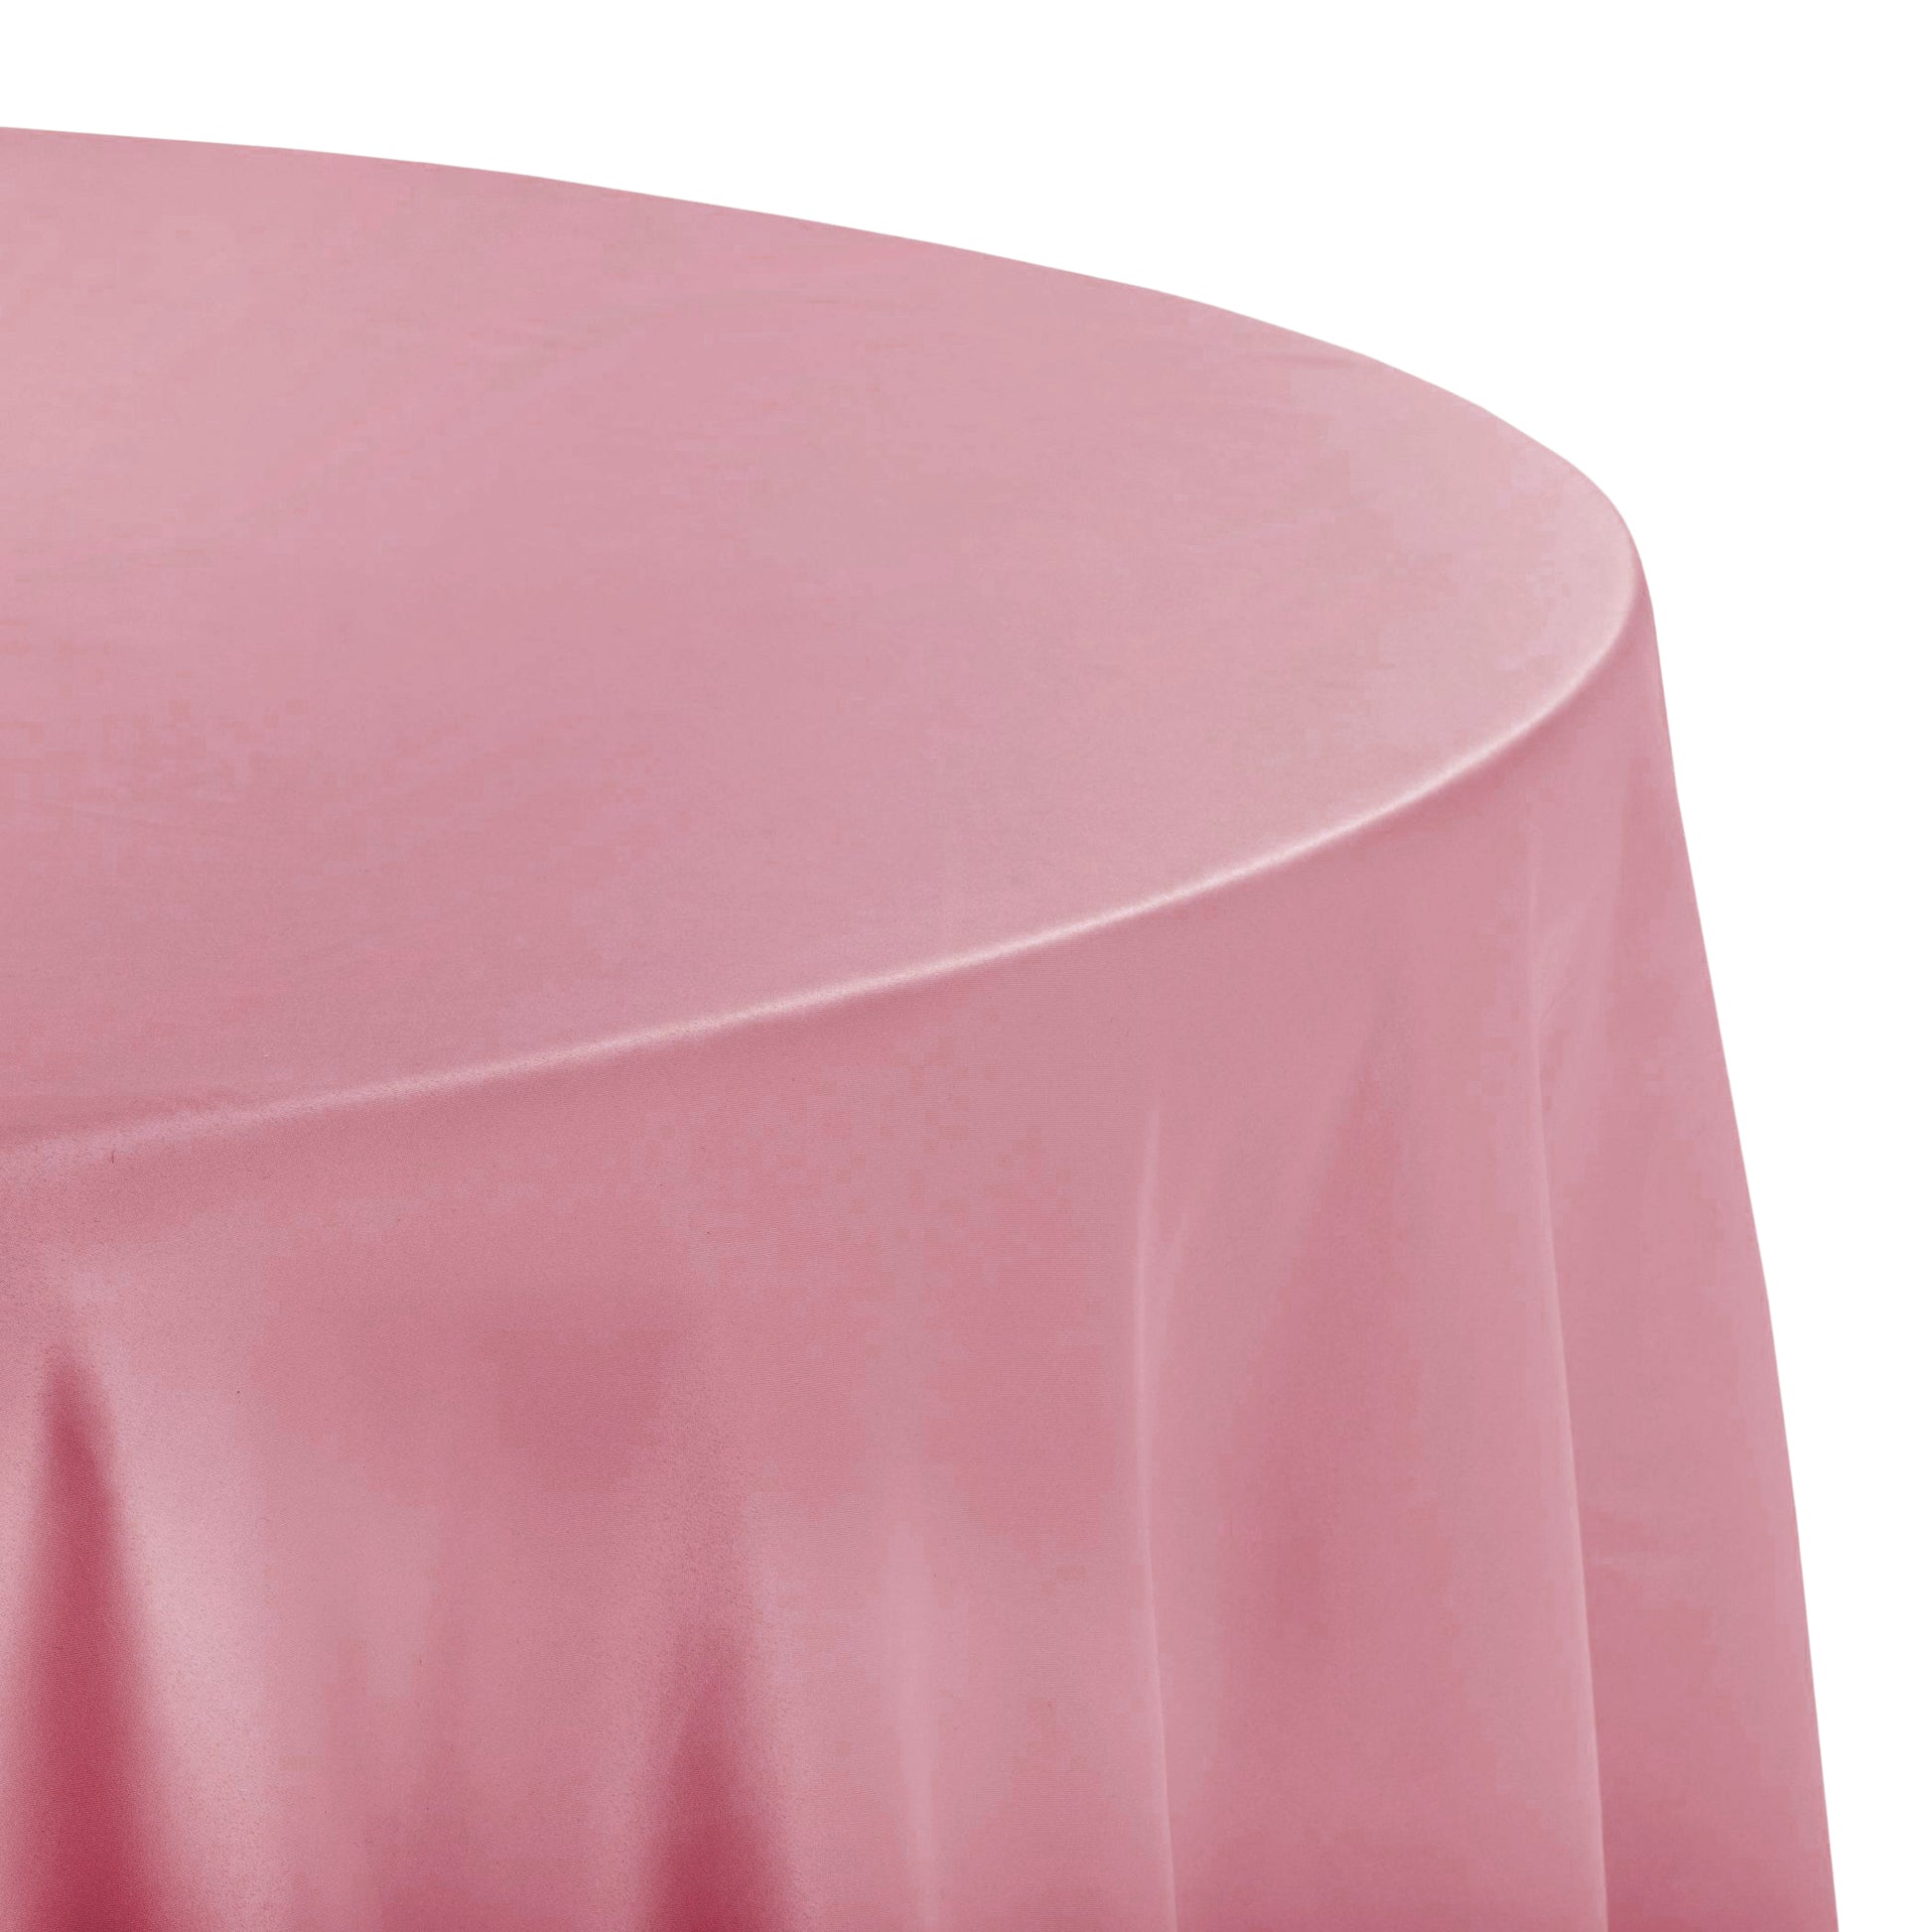 Lamour Satin 132" Round Tablecloth - Dusty Rose/Mauve